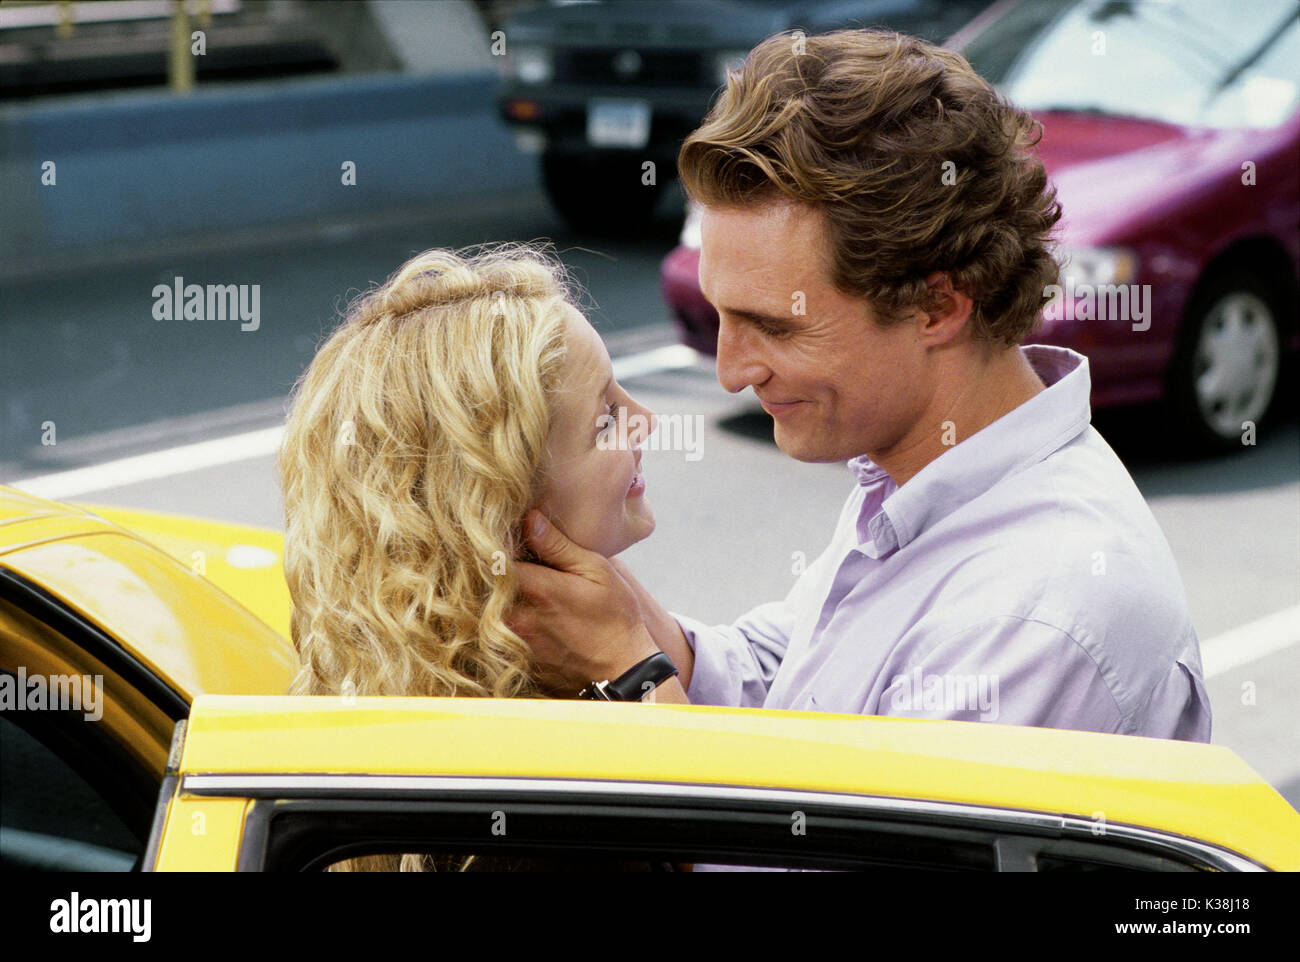 HOW TO LOSE A GUY IN 10 DAYS KATE HUDSON, MATTHEW MCCONAUGHEY     Date: 2003 Stock Photo